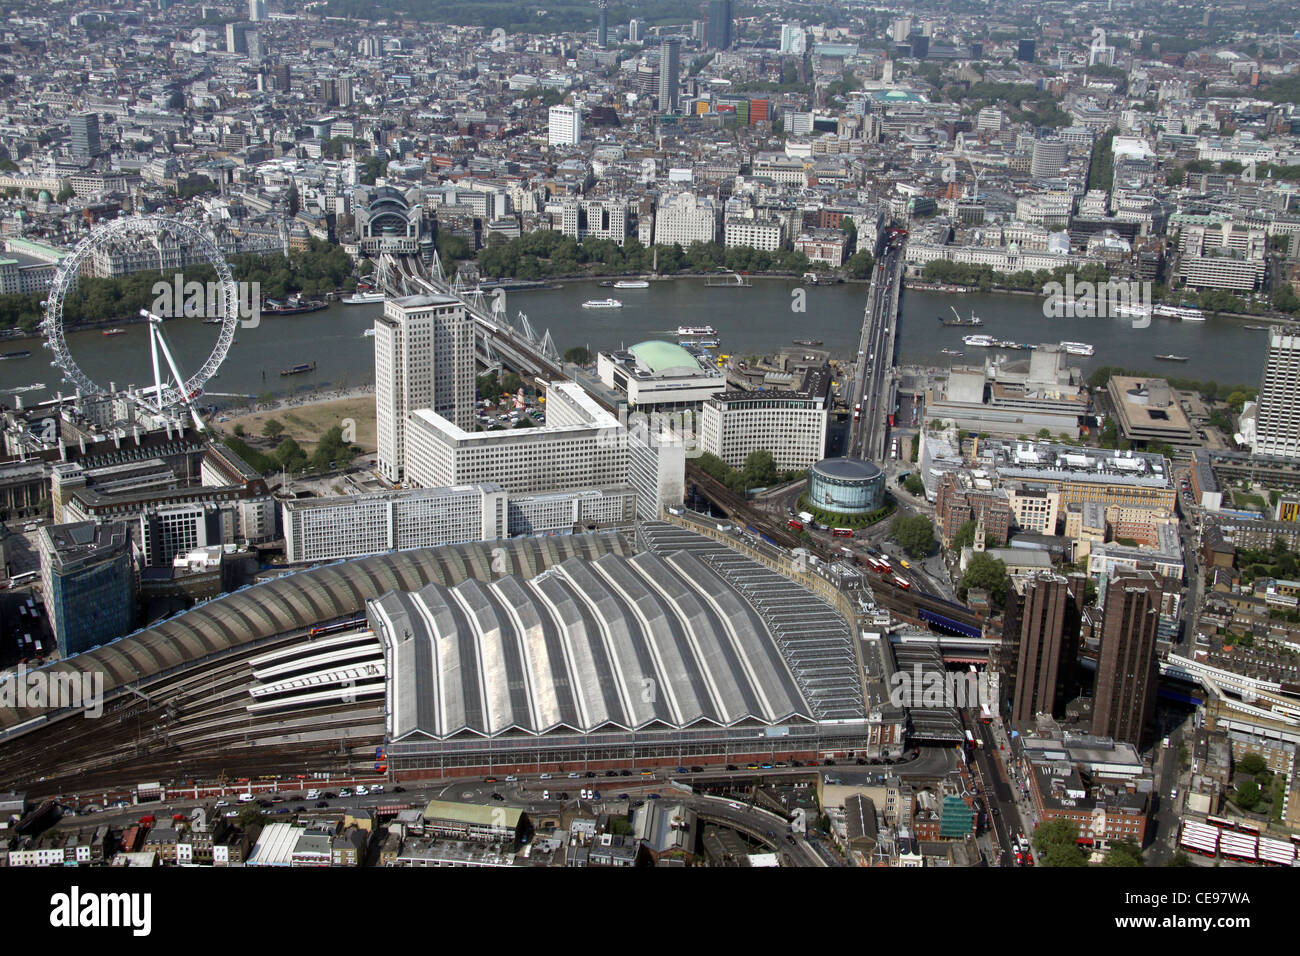 Aerial image of Waterloo Station with the Shell Centre, London Eye & River Thames in the background, London SE1 Stock Photo